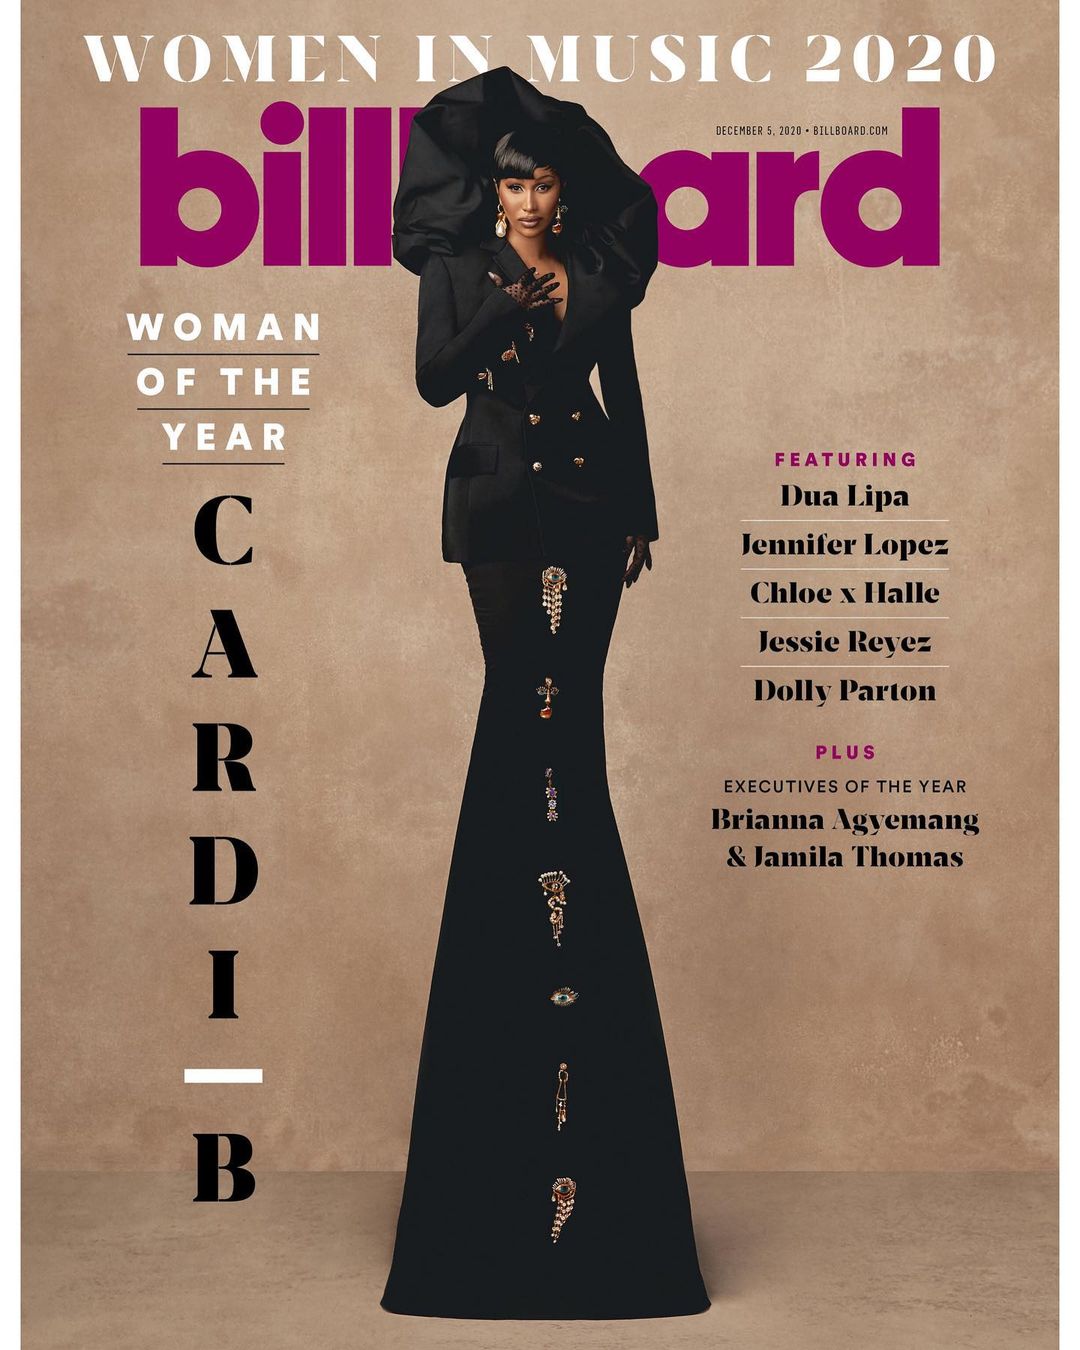 Cardi B Talks WAP, Politics And Business On Her Cover Feature As Billboard Woman of The Year 2020 1